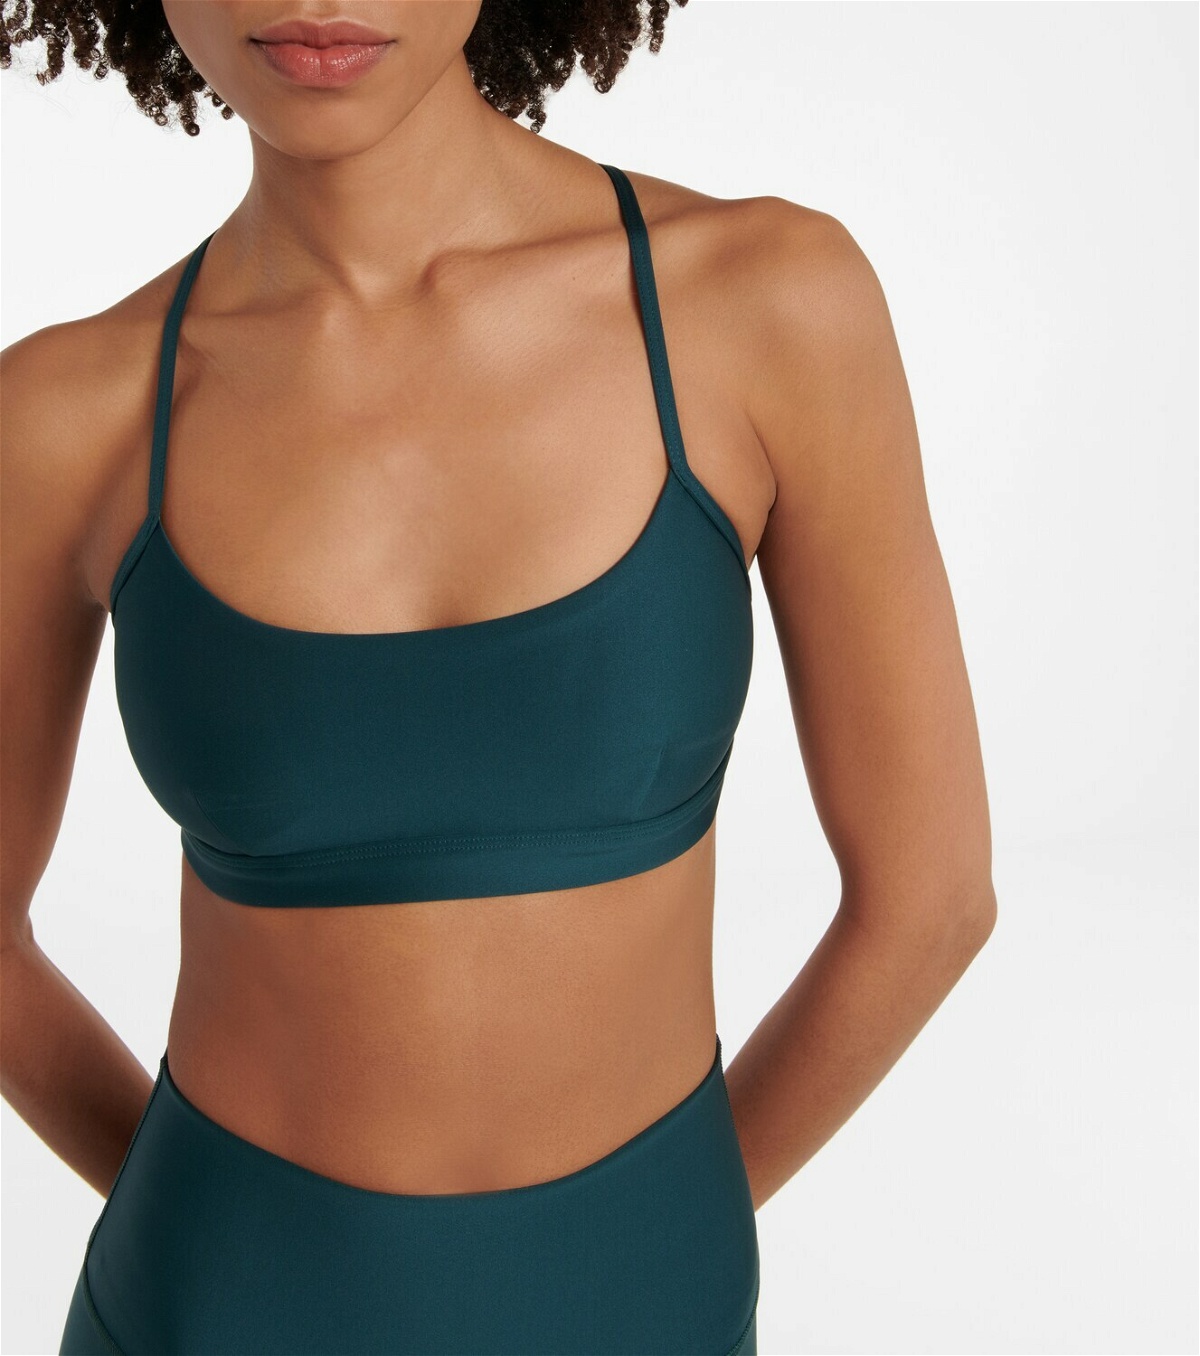 Alo Yoga Airlift Intrigue sports bra